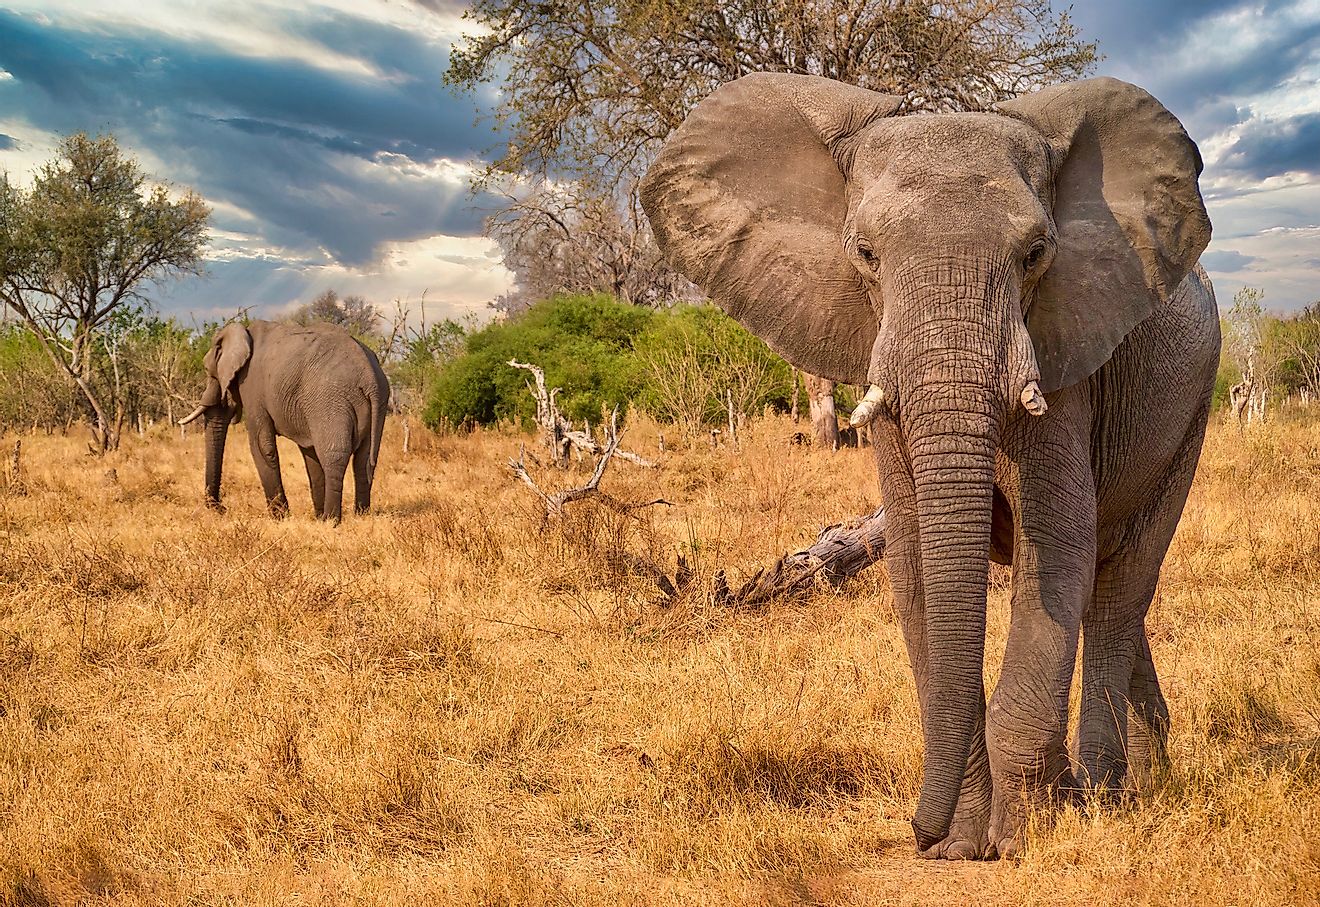 The African elephant is found in the African continent. Its ears are said to appear like the map of Africa.